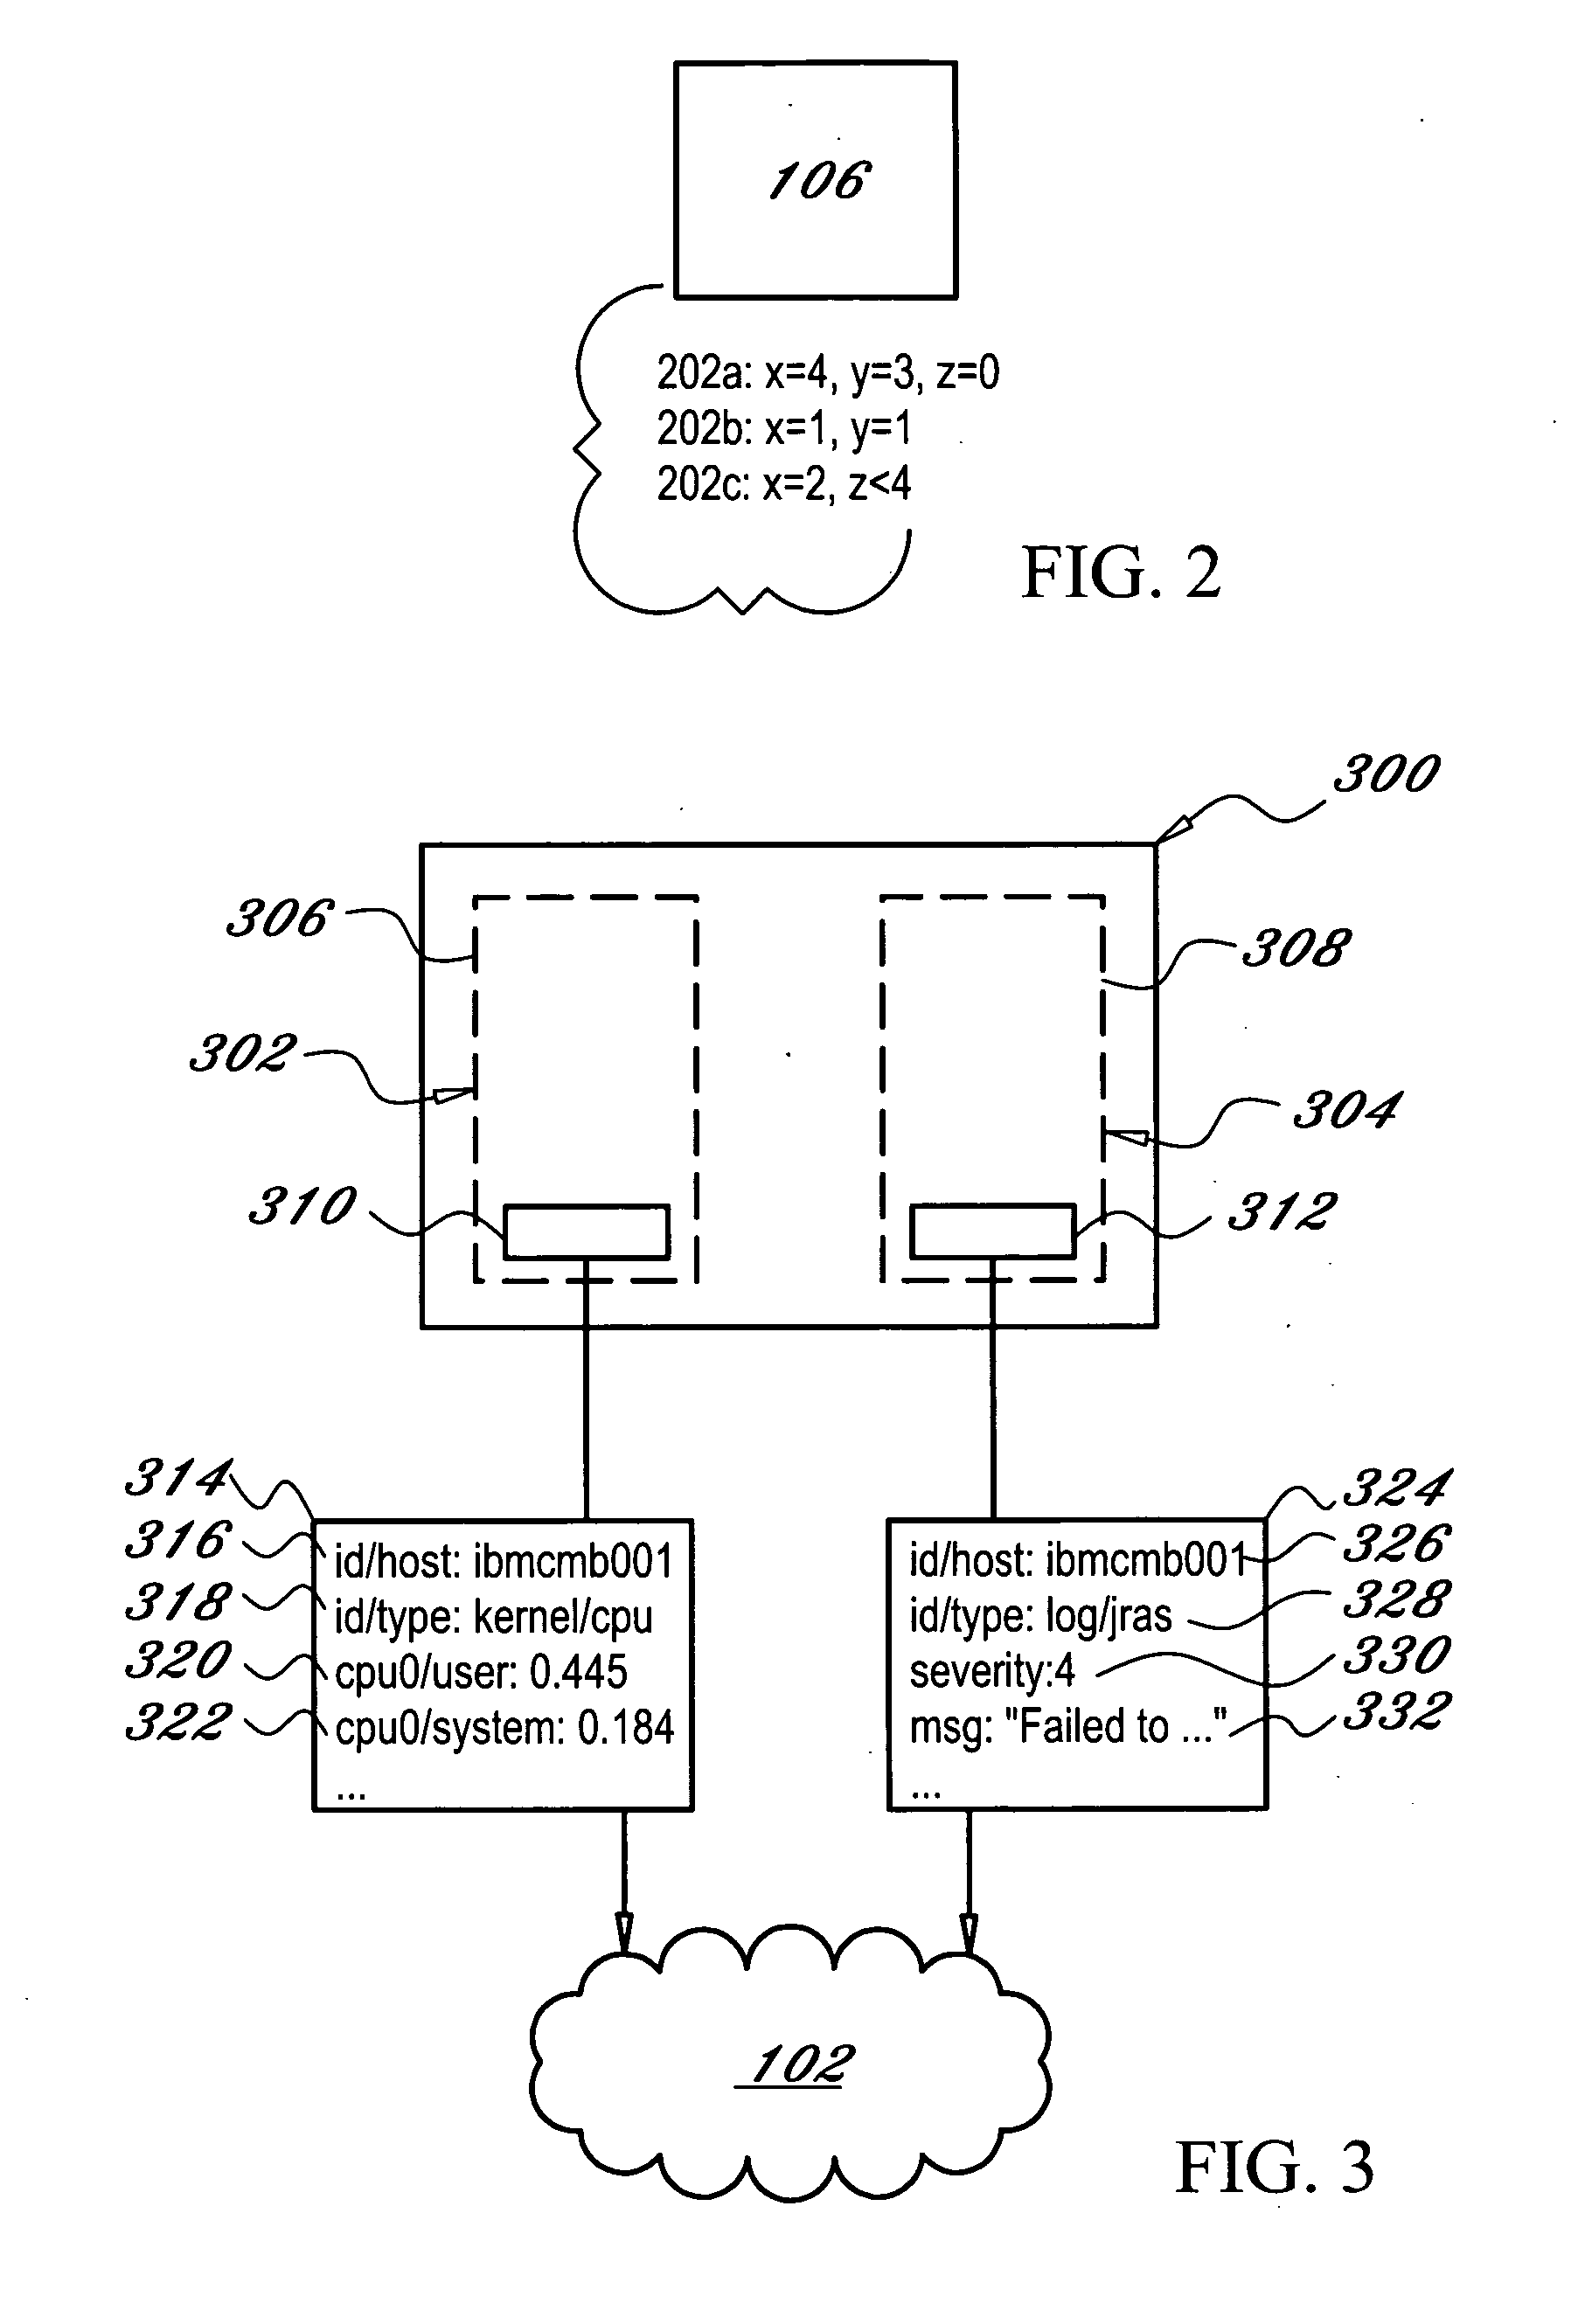 Cluster monitoring system with content-based event routing